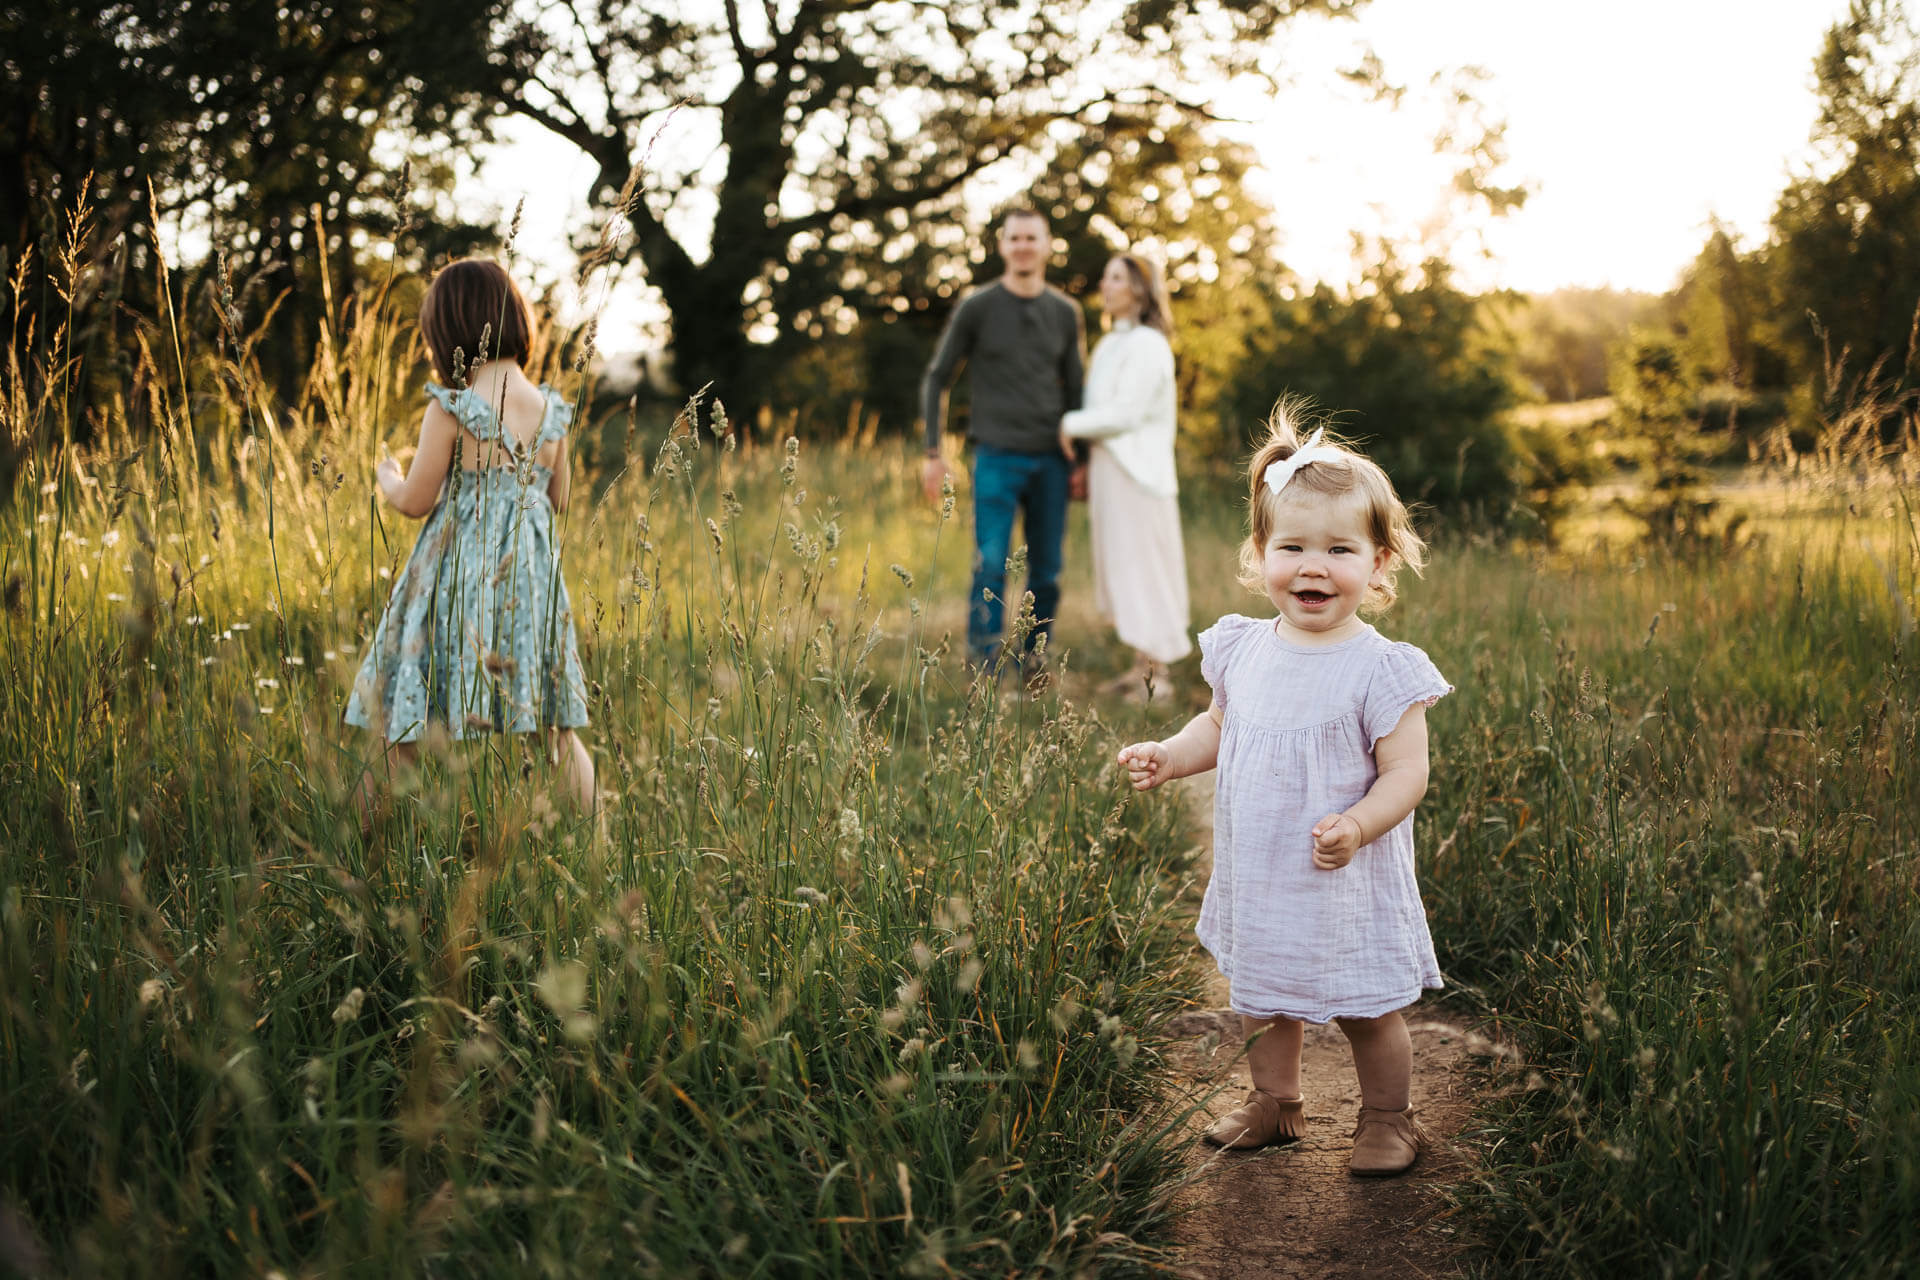 Toddler girl is laughing on a flower field while her big sister and parents stand in the same field'